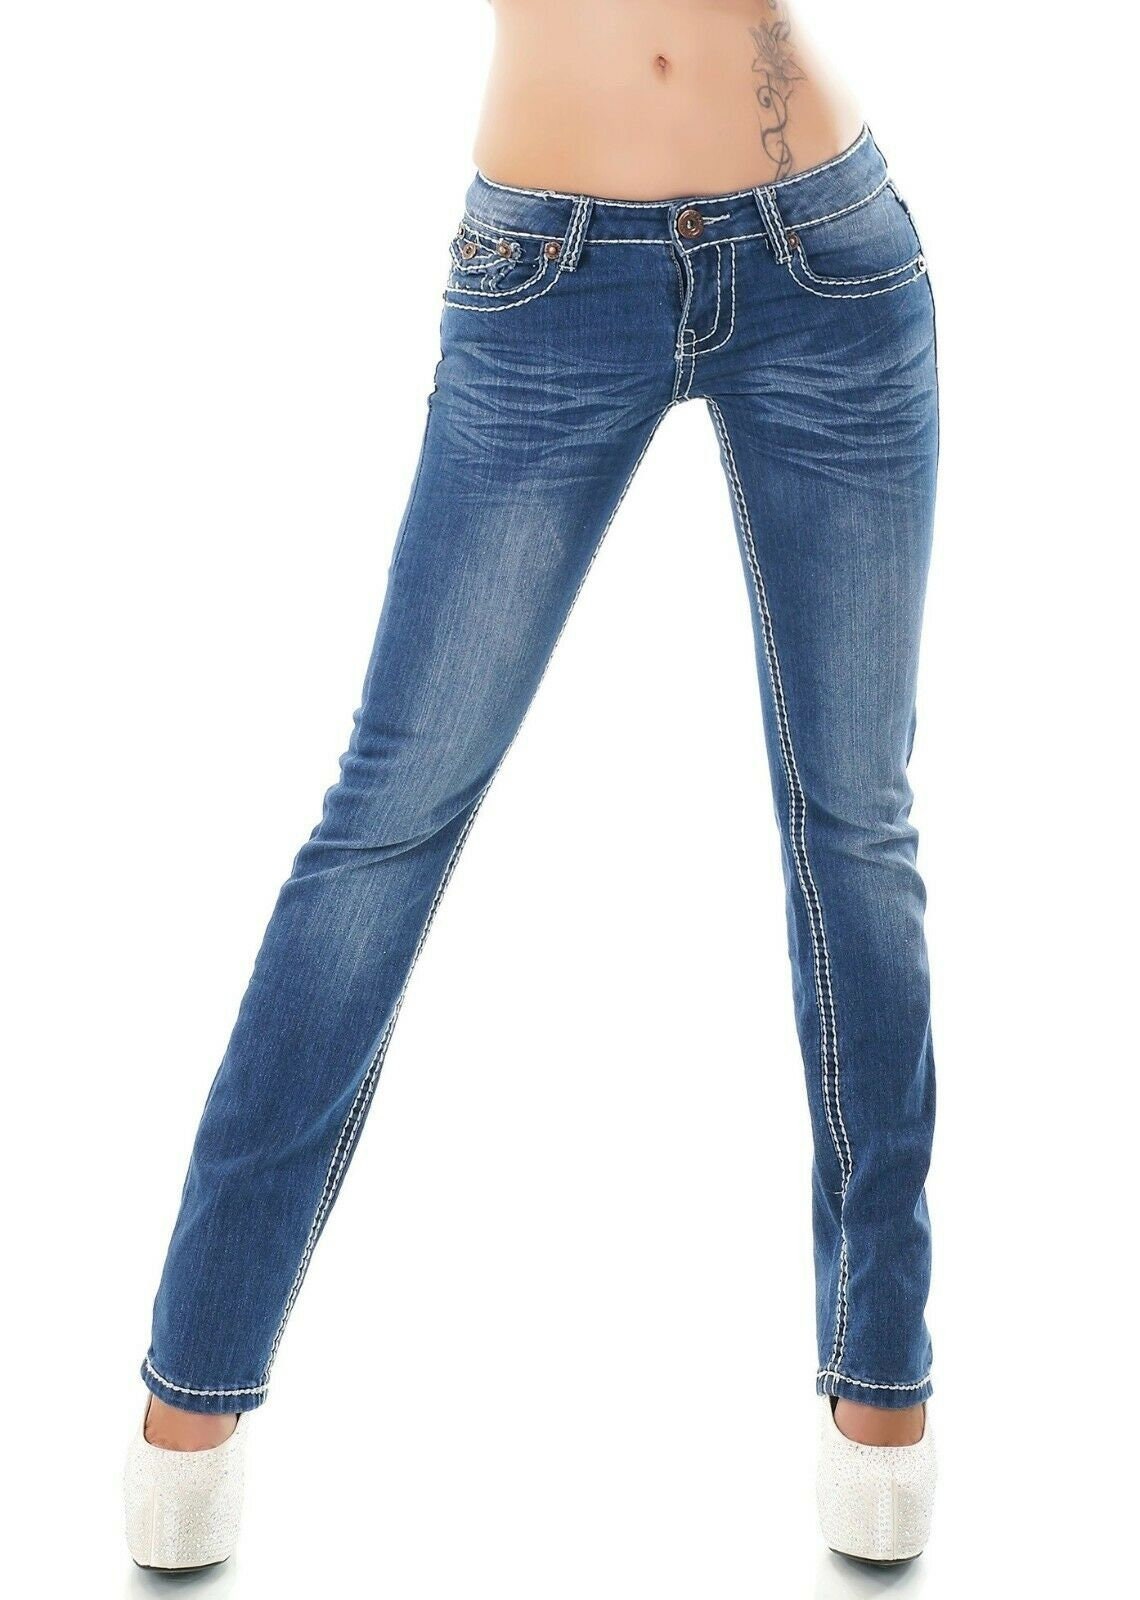 Women's Straight Leg Jeans Stretch Blue Washed Mid Rise Trousers UK 8 ...